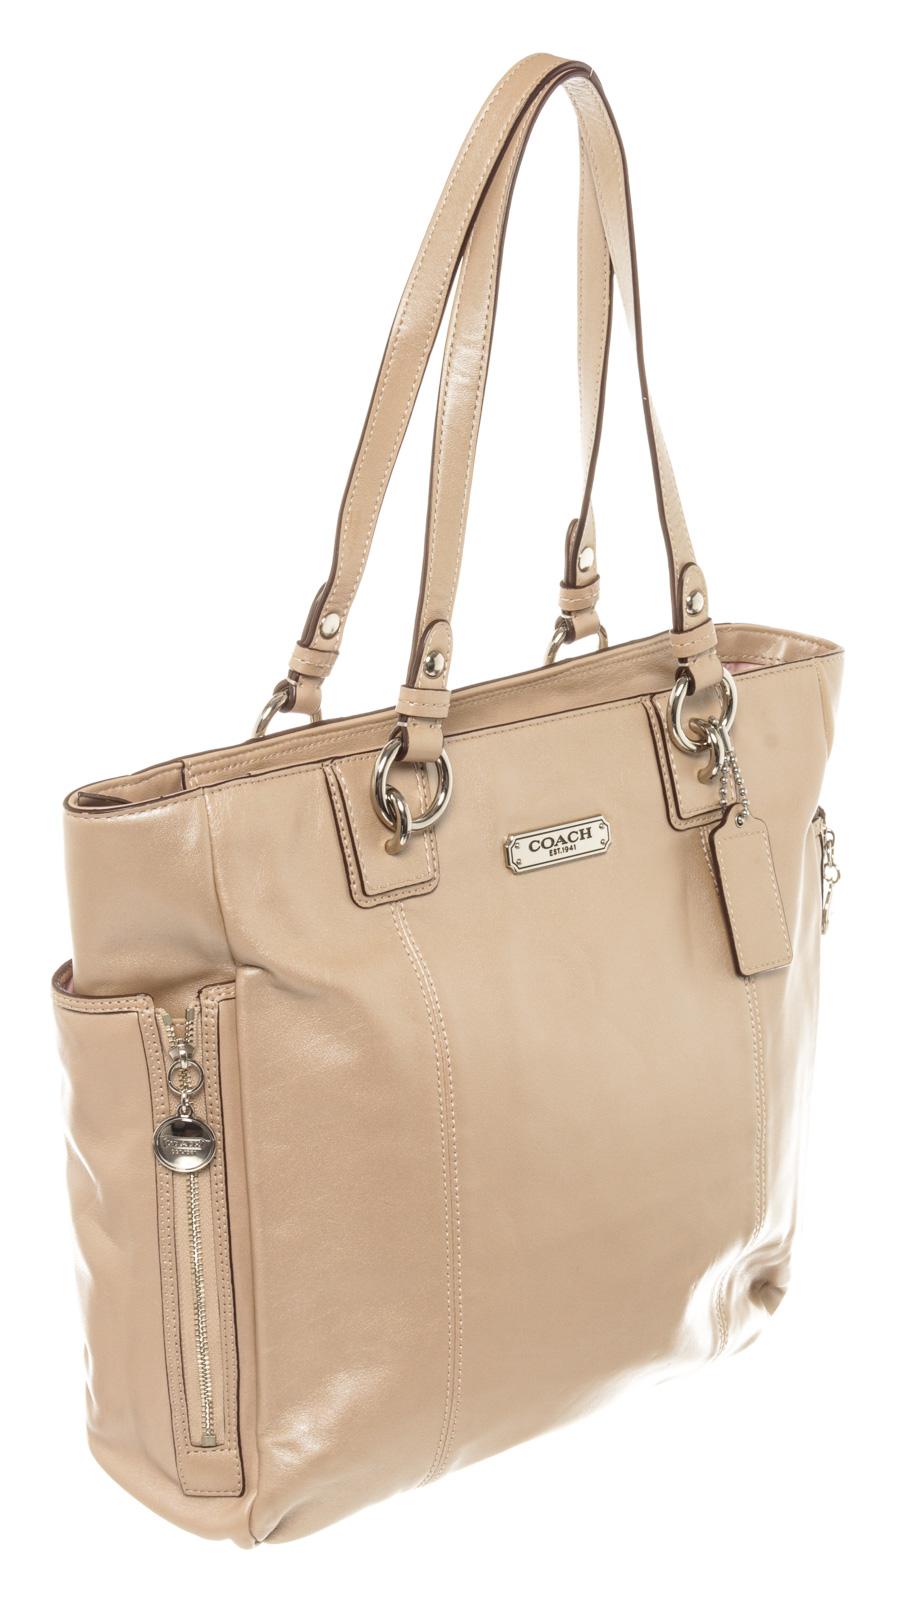 Beige leather Coach Gallery Zipper tote bag with silver-tone hardware, main compartment with 3 pockets at interior wall; one with zip closure, zip closure at top, pink satin lining, logo placard at front and two outer pockets at both side.


24446MSC